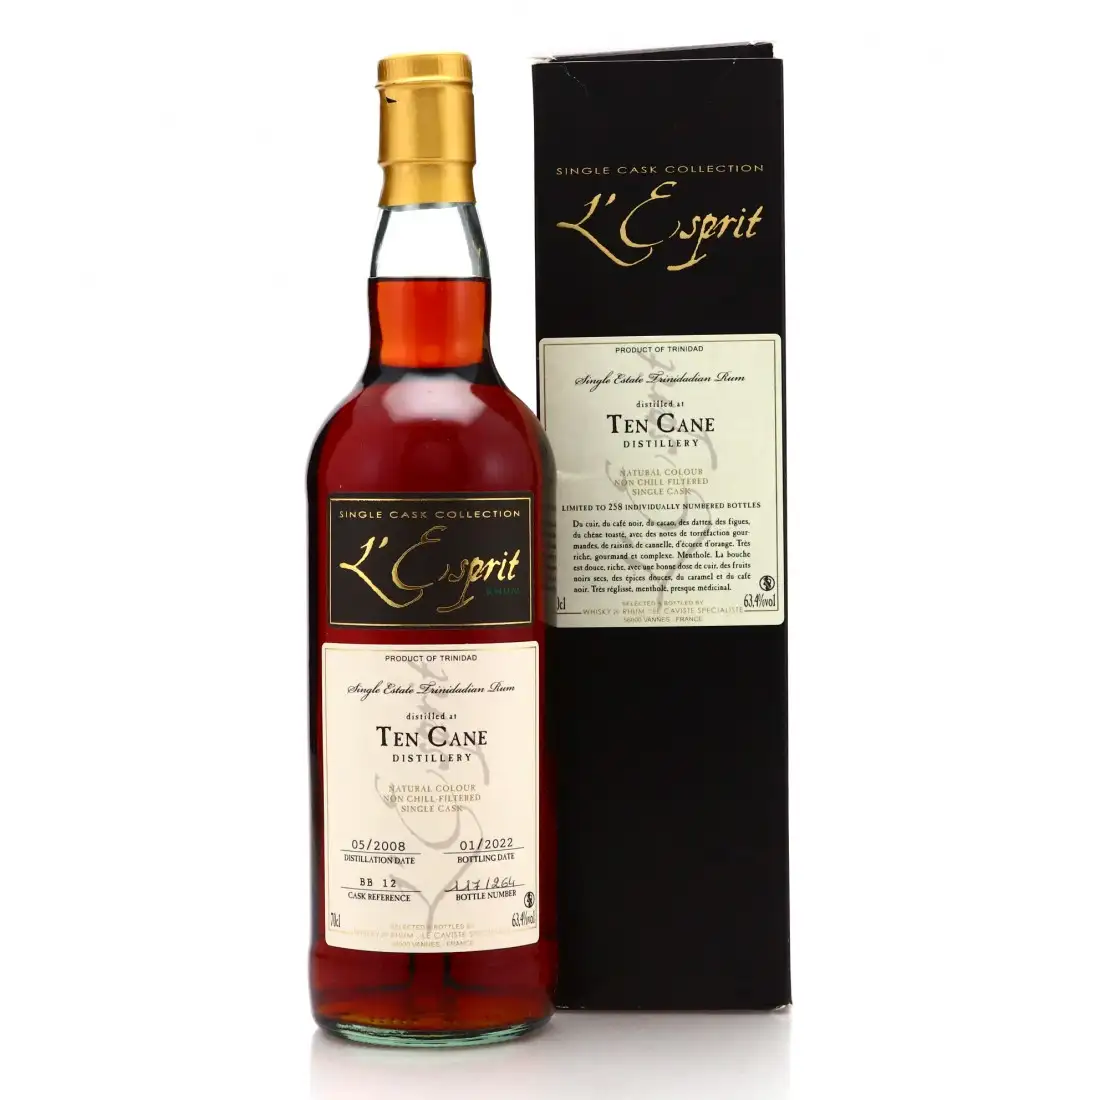 Image of the front of the bottle of the rum L‘Esprit Ten Cane